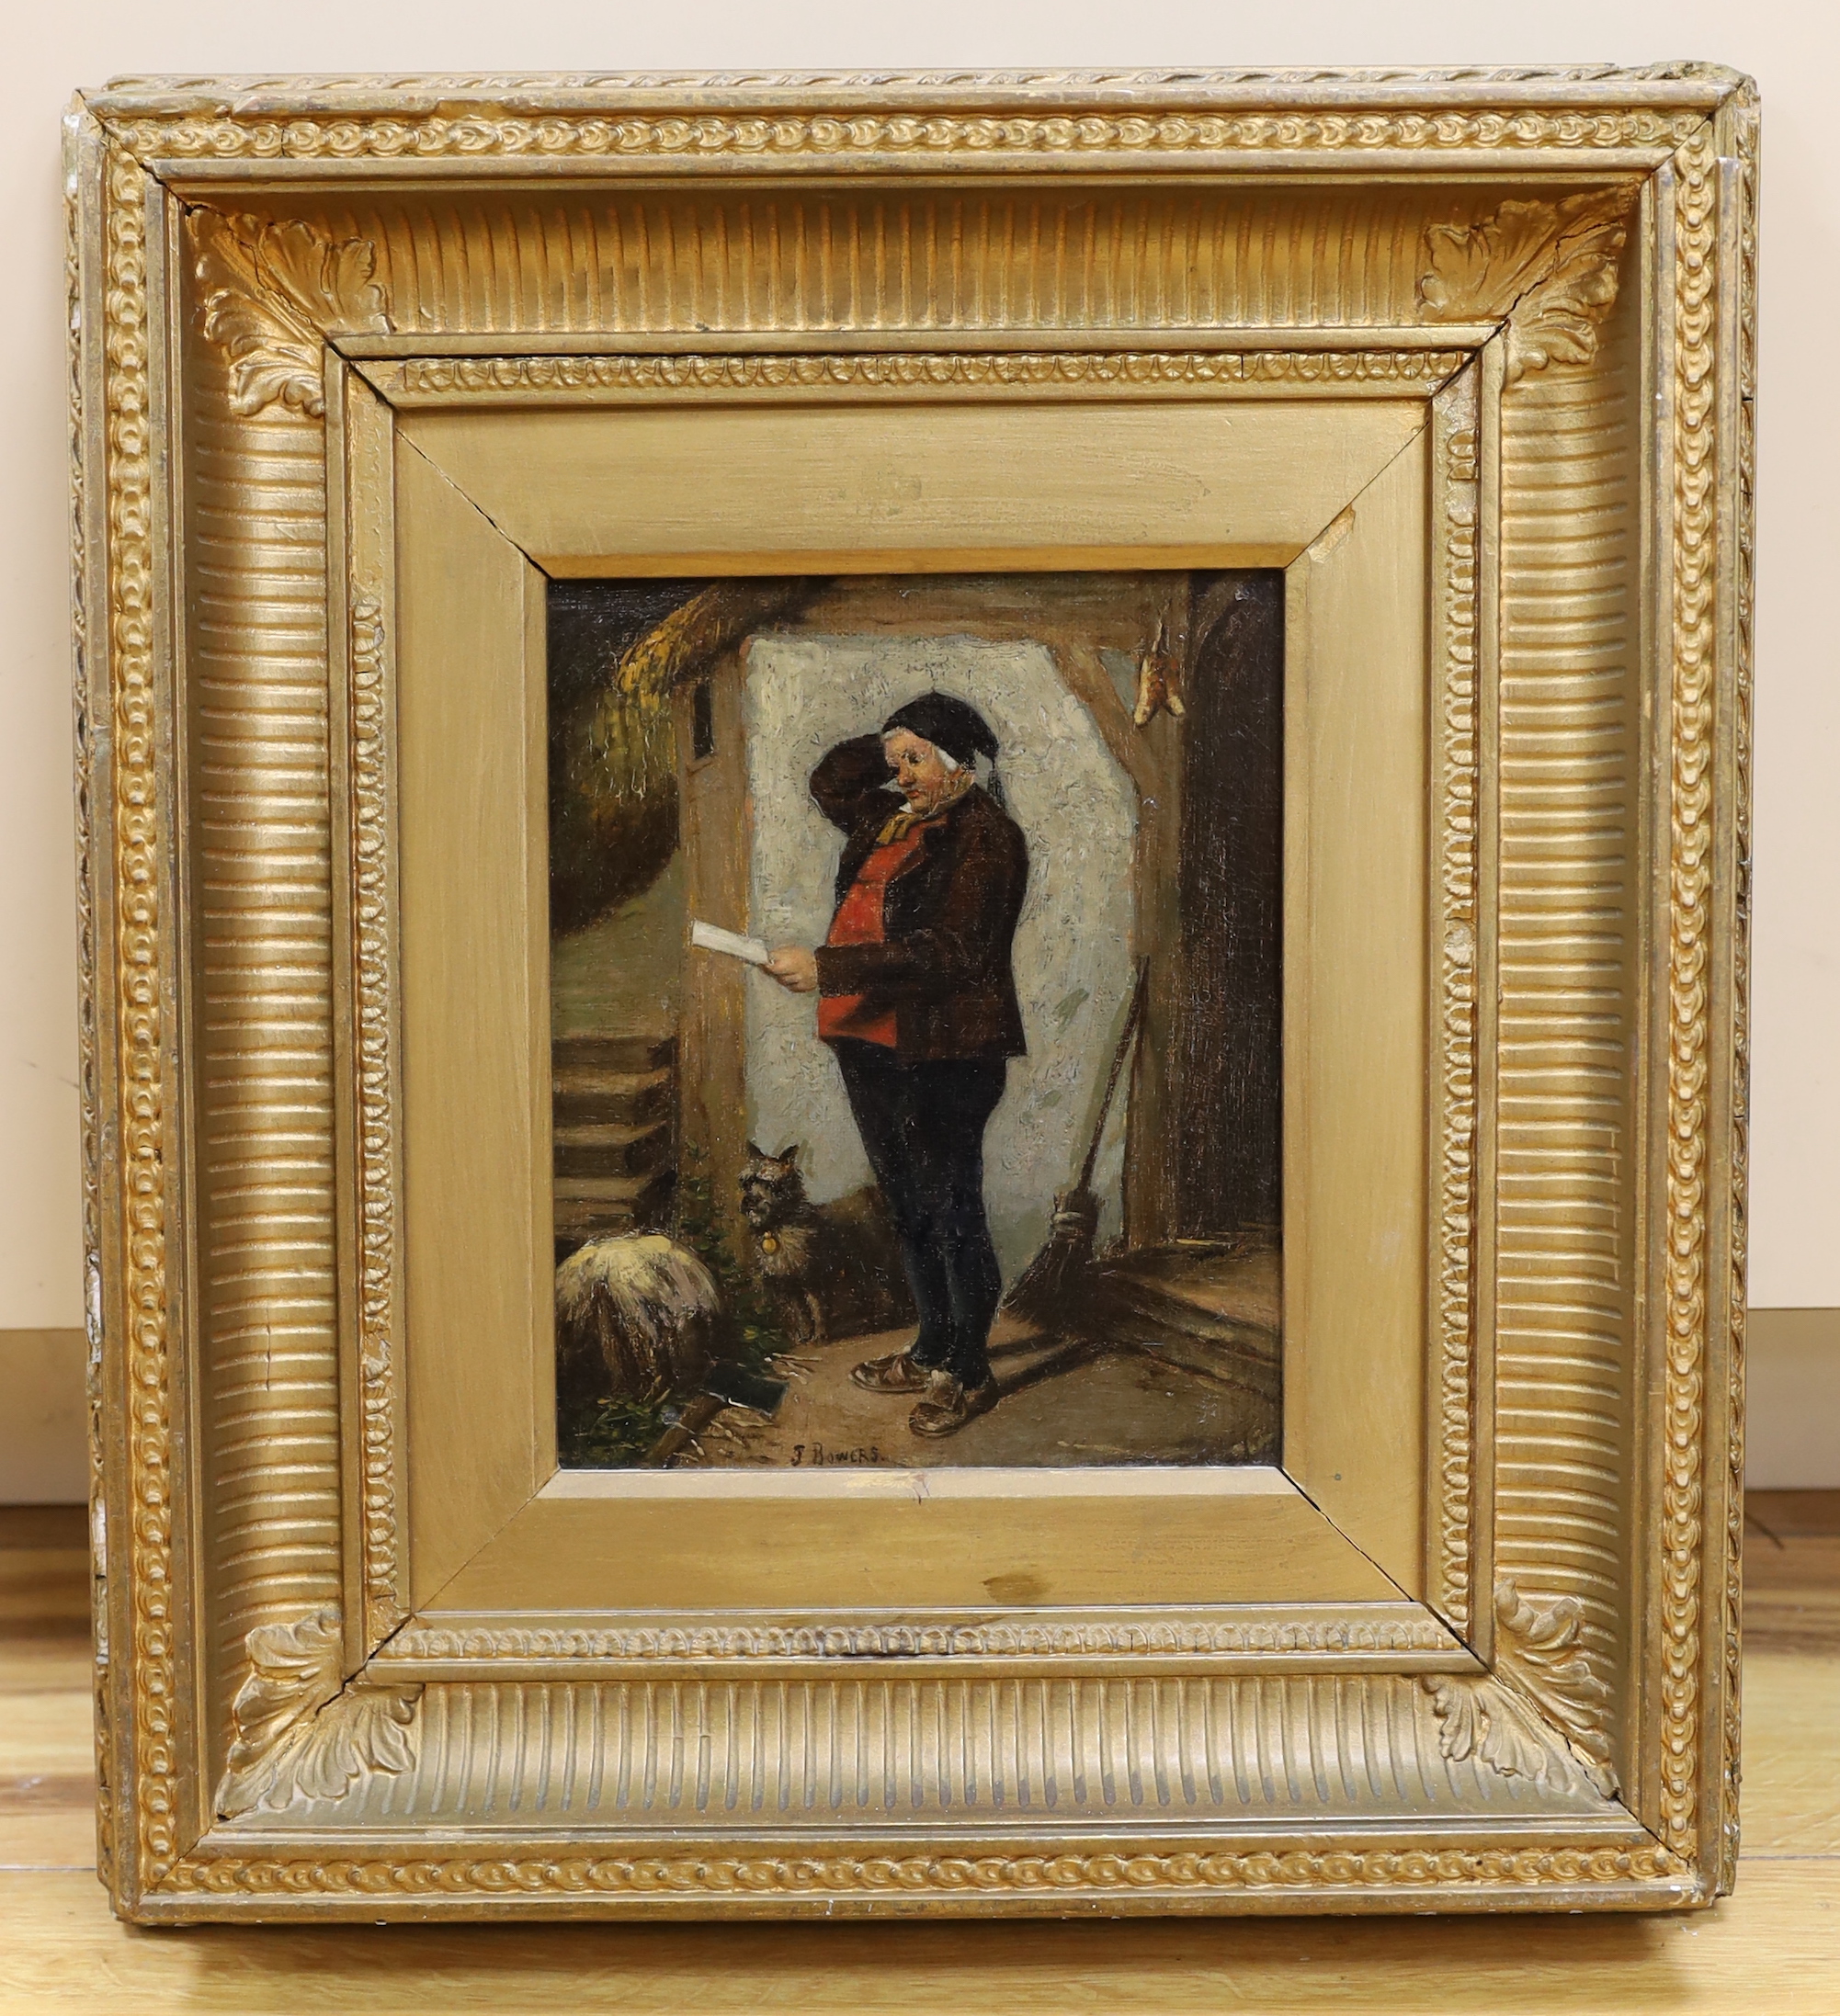 J Bowers (19th century), oil on canvas, Interior scene with gentleman and dog, signed, 19 x 16cm